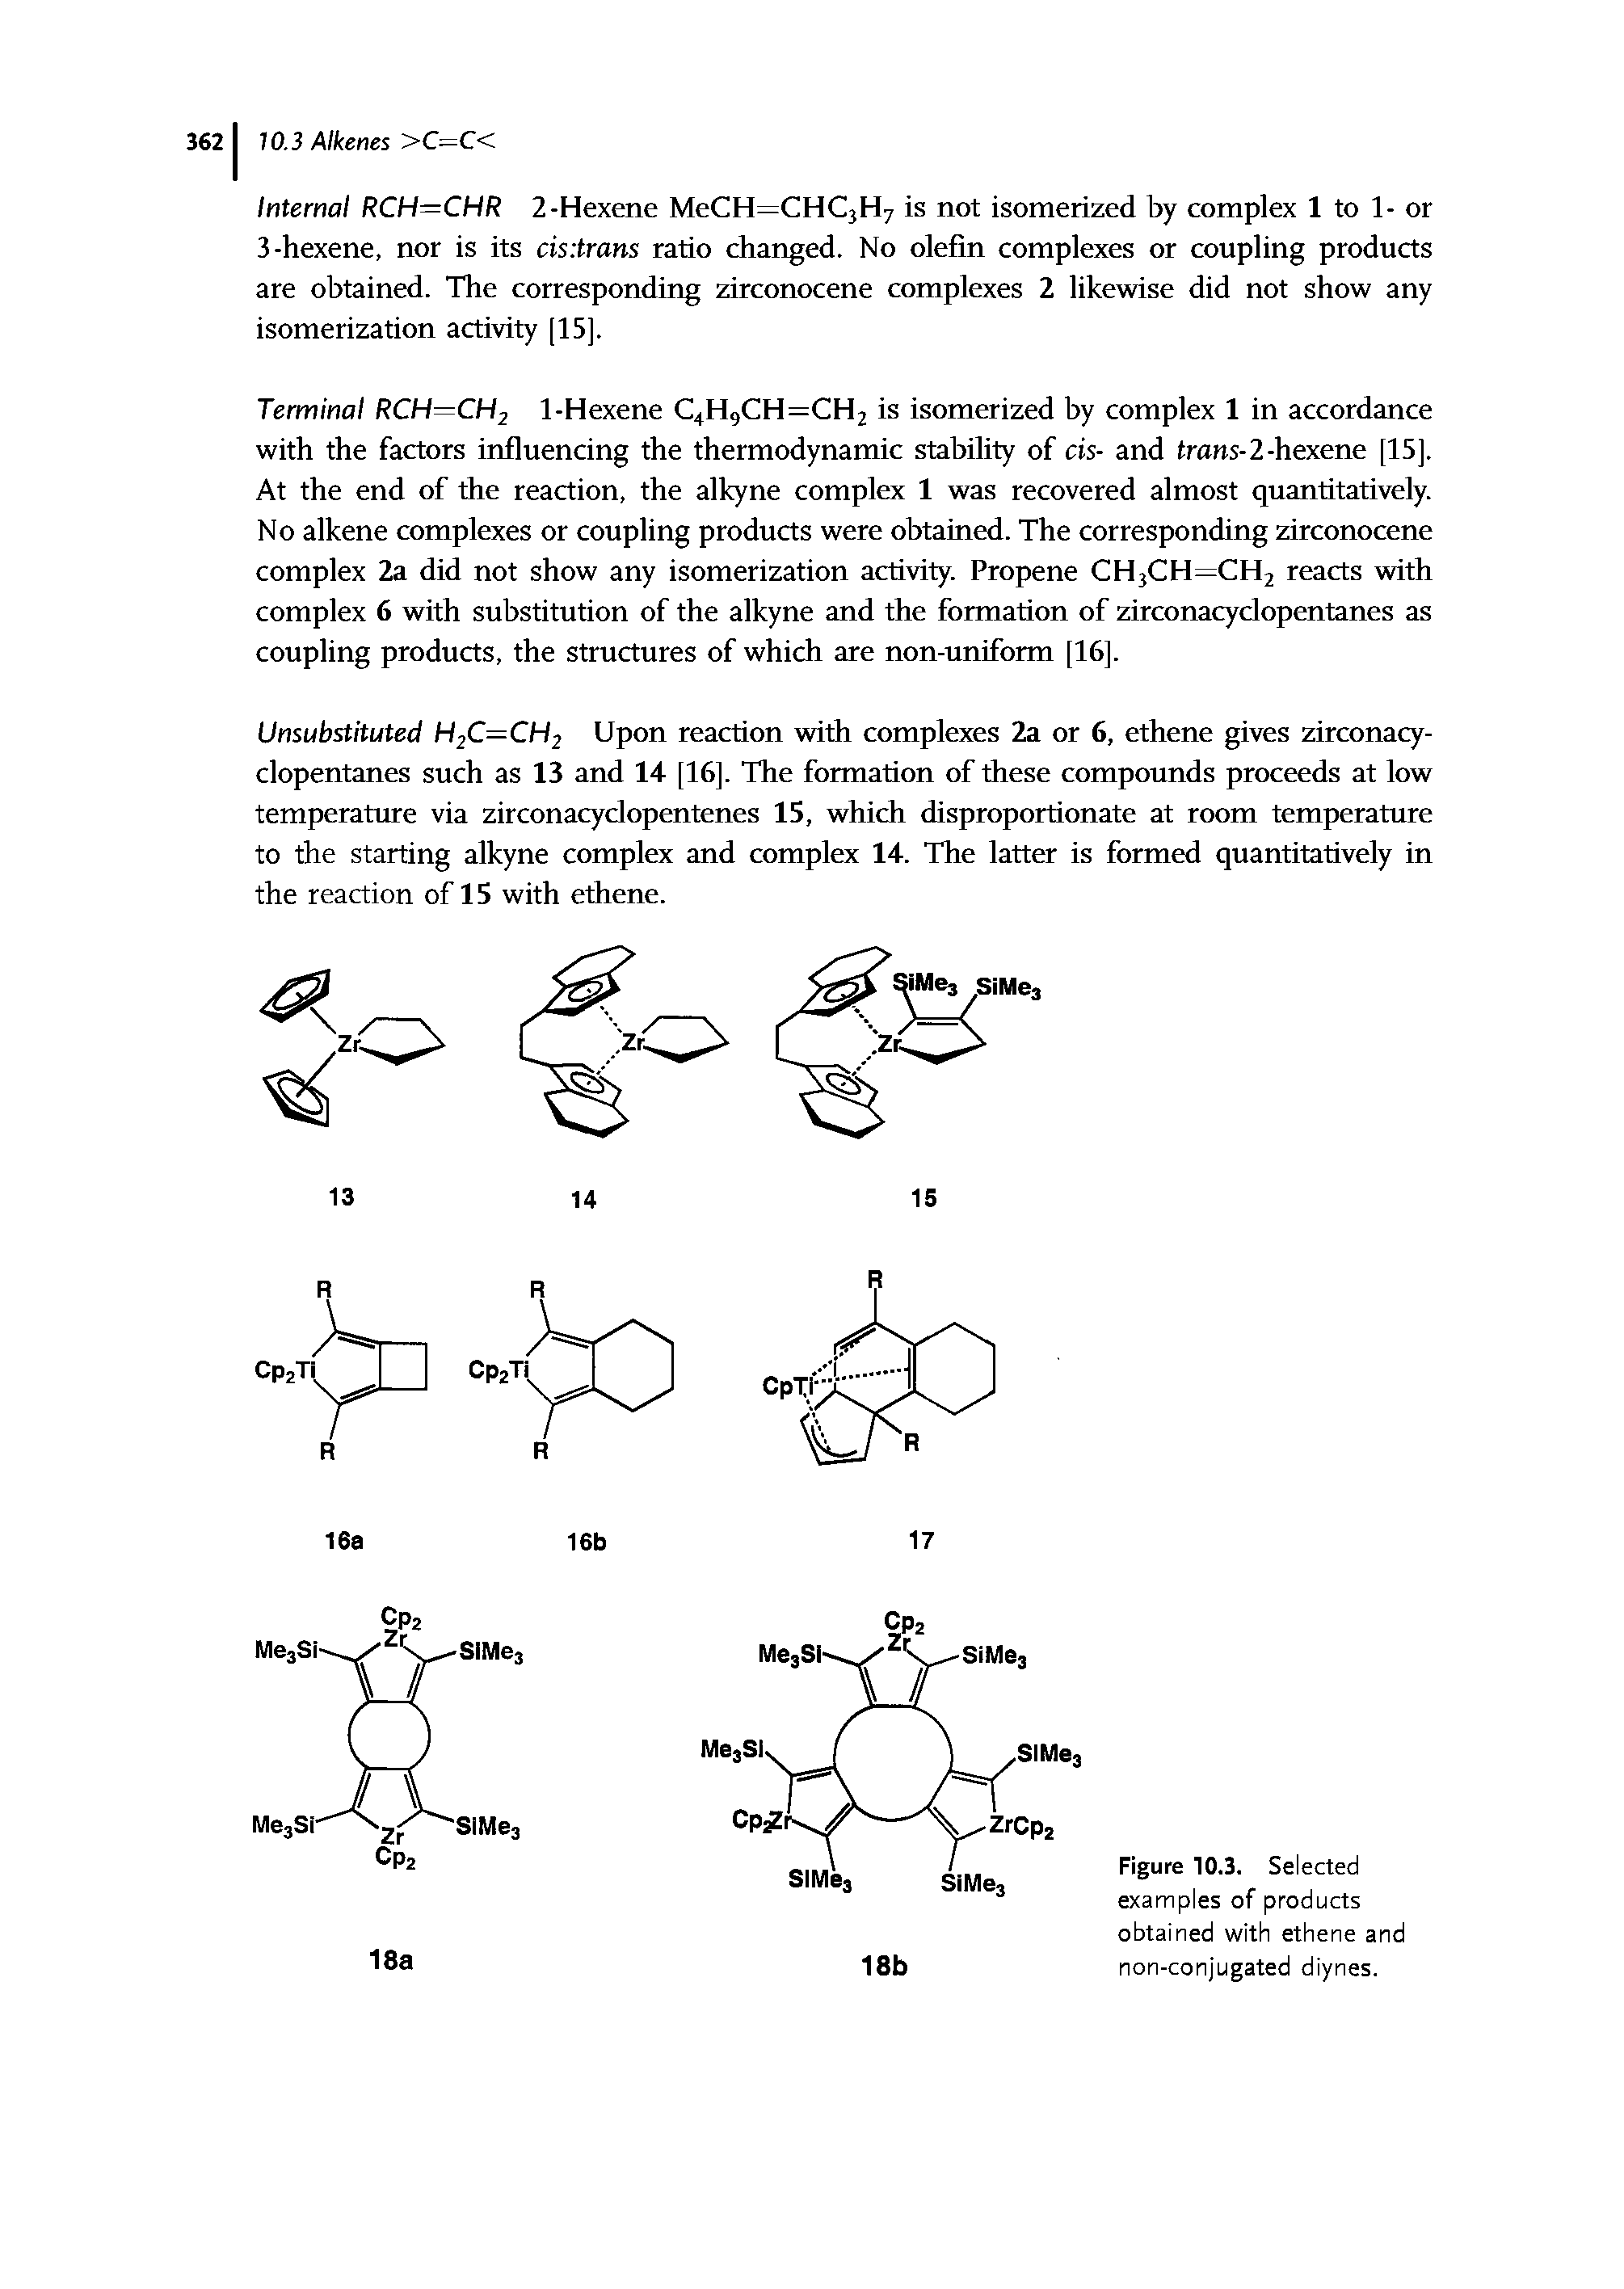 Figure 10.3. Selected examples of products obtained with ethene and non-conjugated diynes.